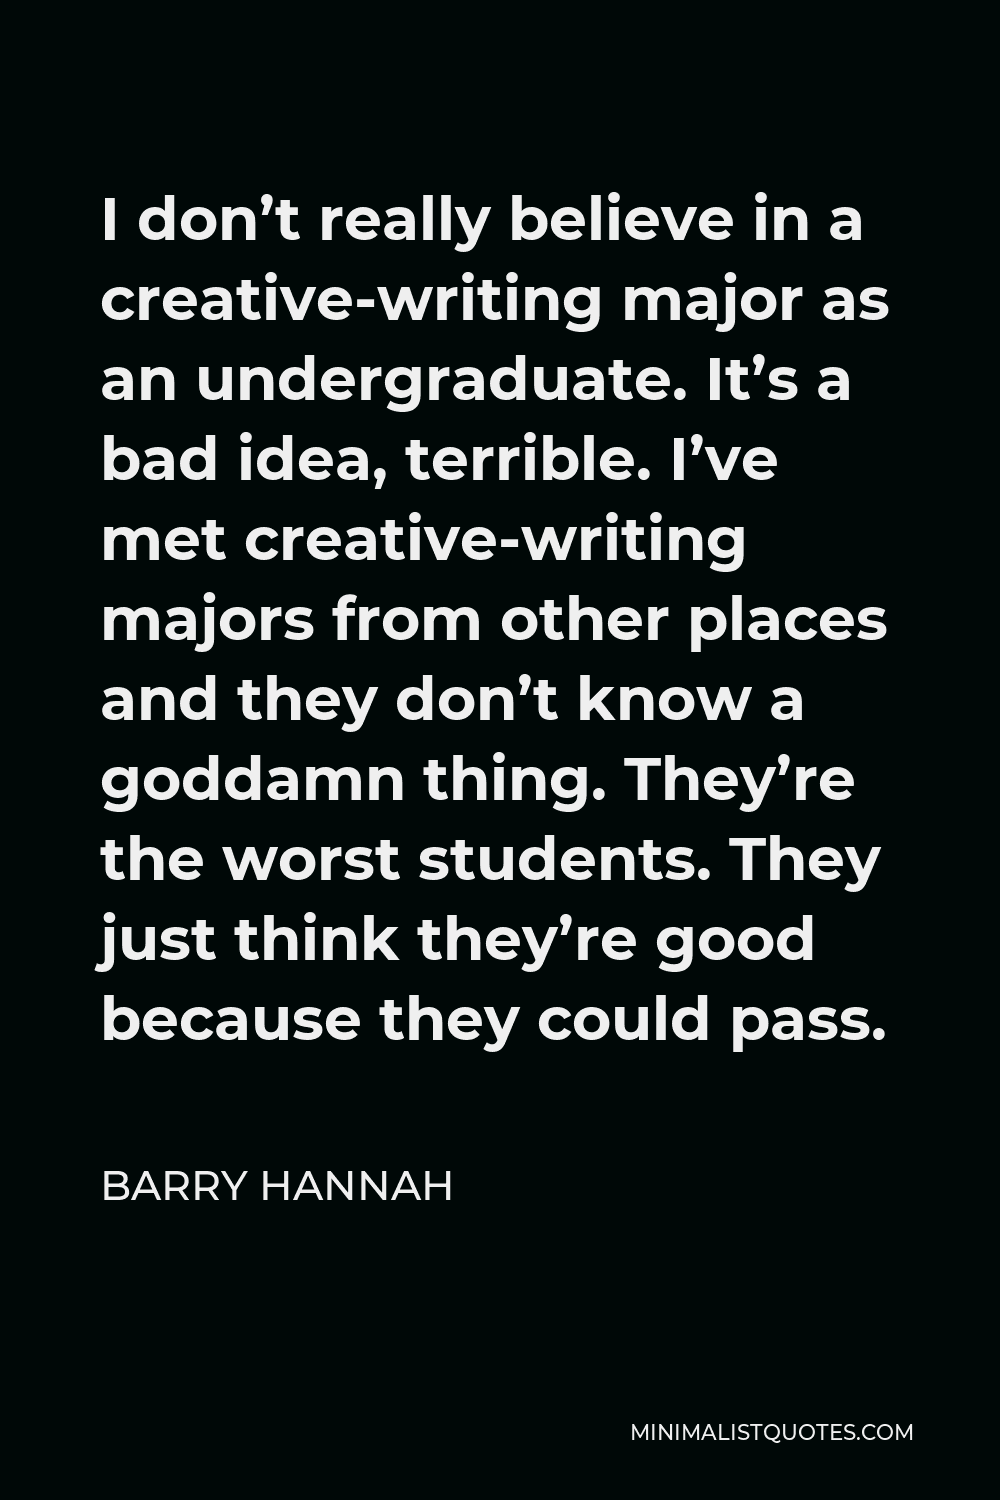 Barry Hannah Quote - I don’t really believe in a creative-writing major as an undergraduate. It’s a bad idea, terrible. I’ve met creative-writing majors from other places and they don’t know a goddamn thing. They’re the worst students. They just think they’re good because they could pass.